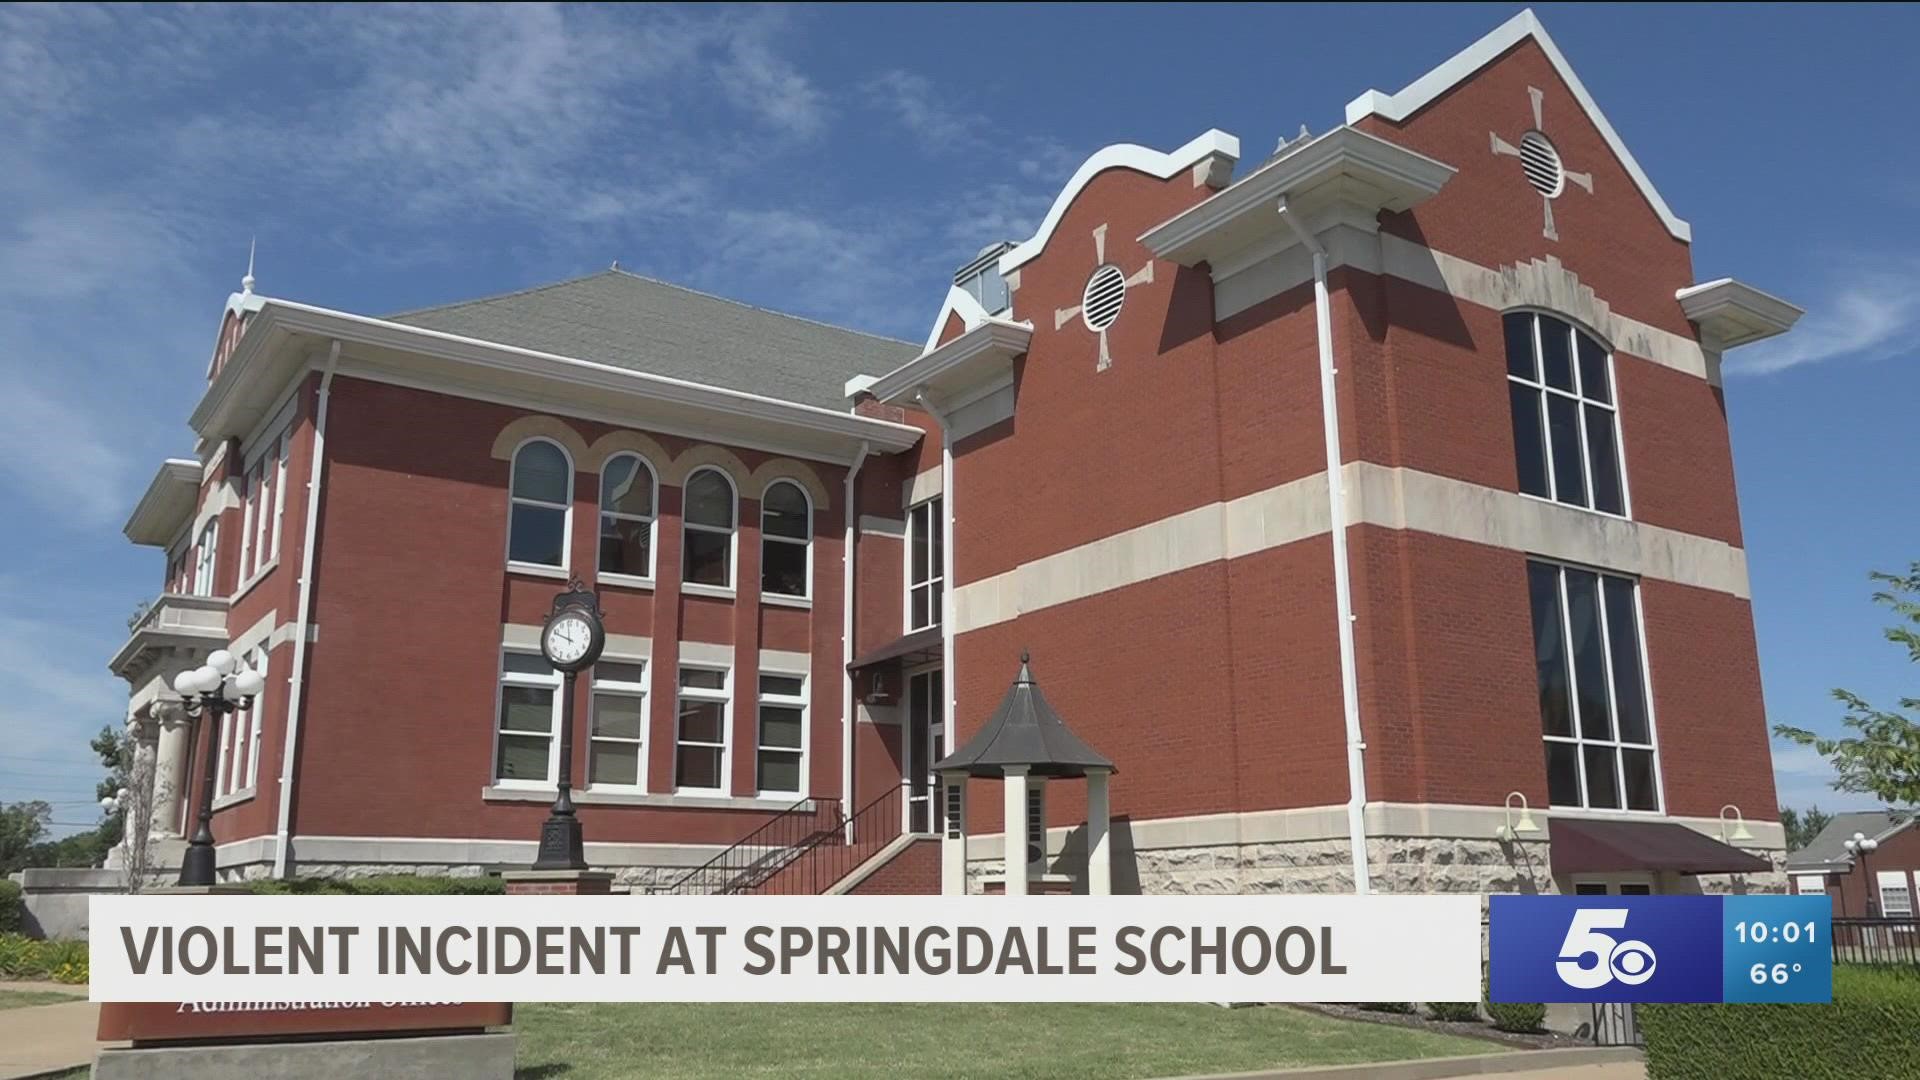 After a fight at Lakeside Junior High School, parents Tim and Melissa Reynolds say Springdale Schools did not take adequate measures to protect their child.